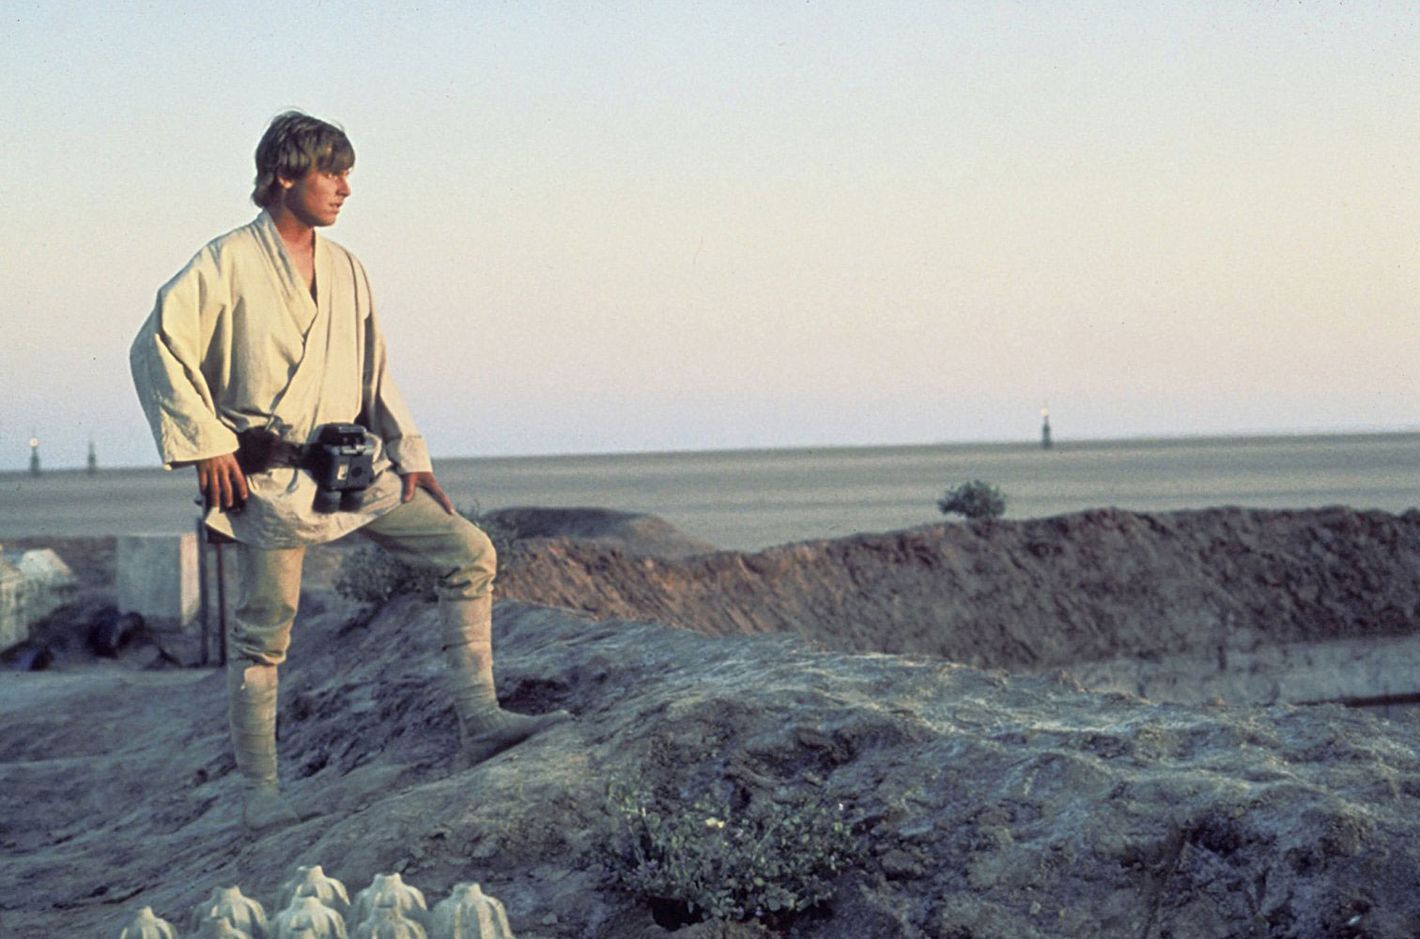 Star Wars Planets, Ranked: From Coruscant to Tatooine